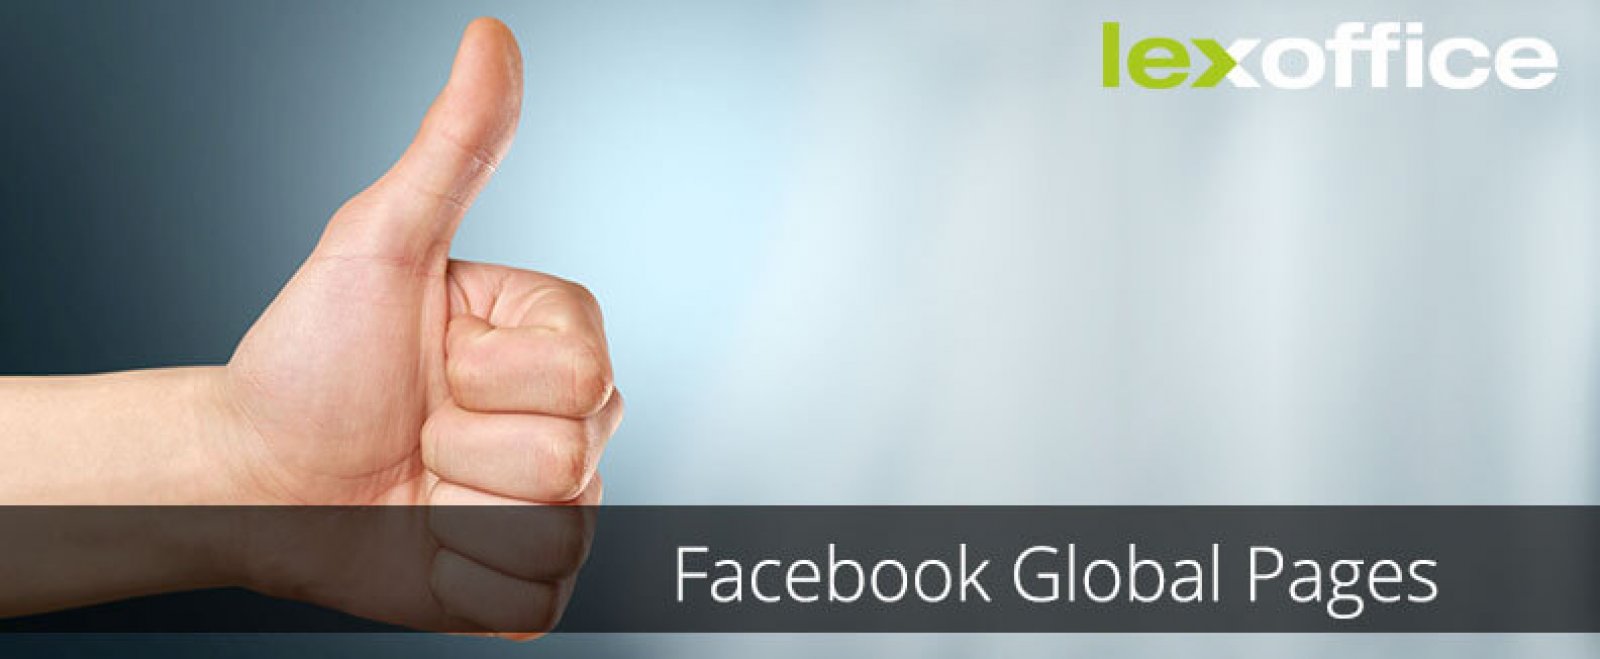 Facebook Global Pages